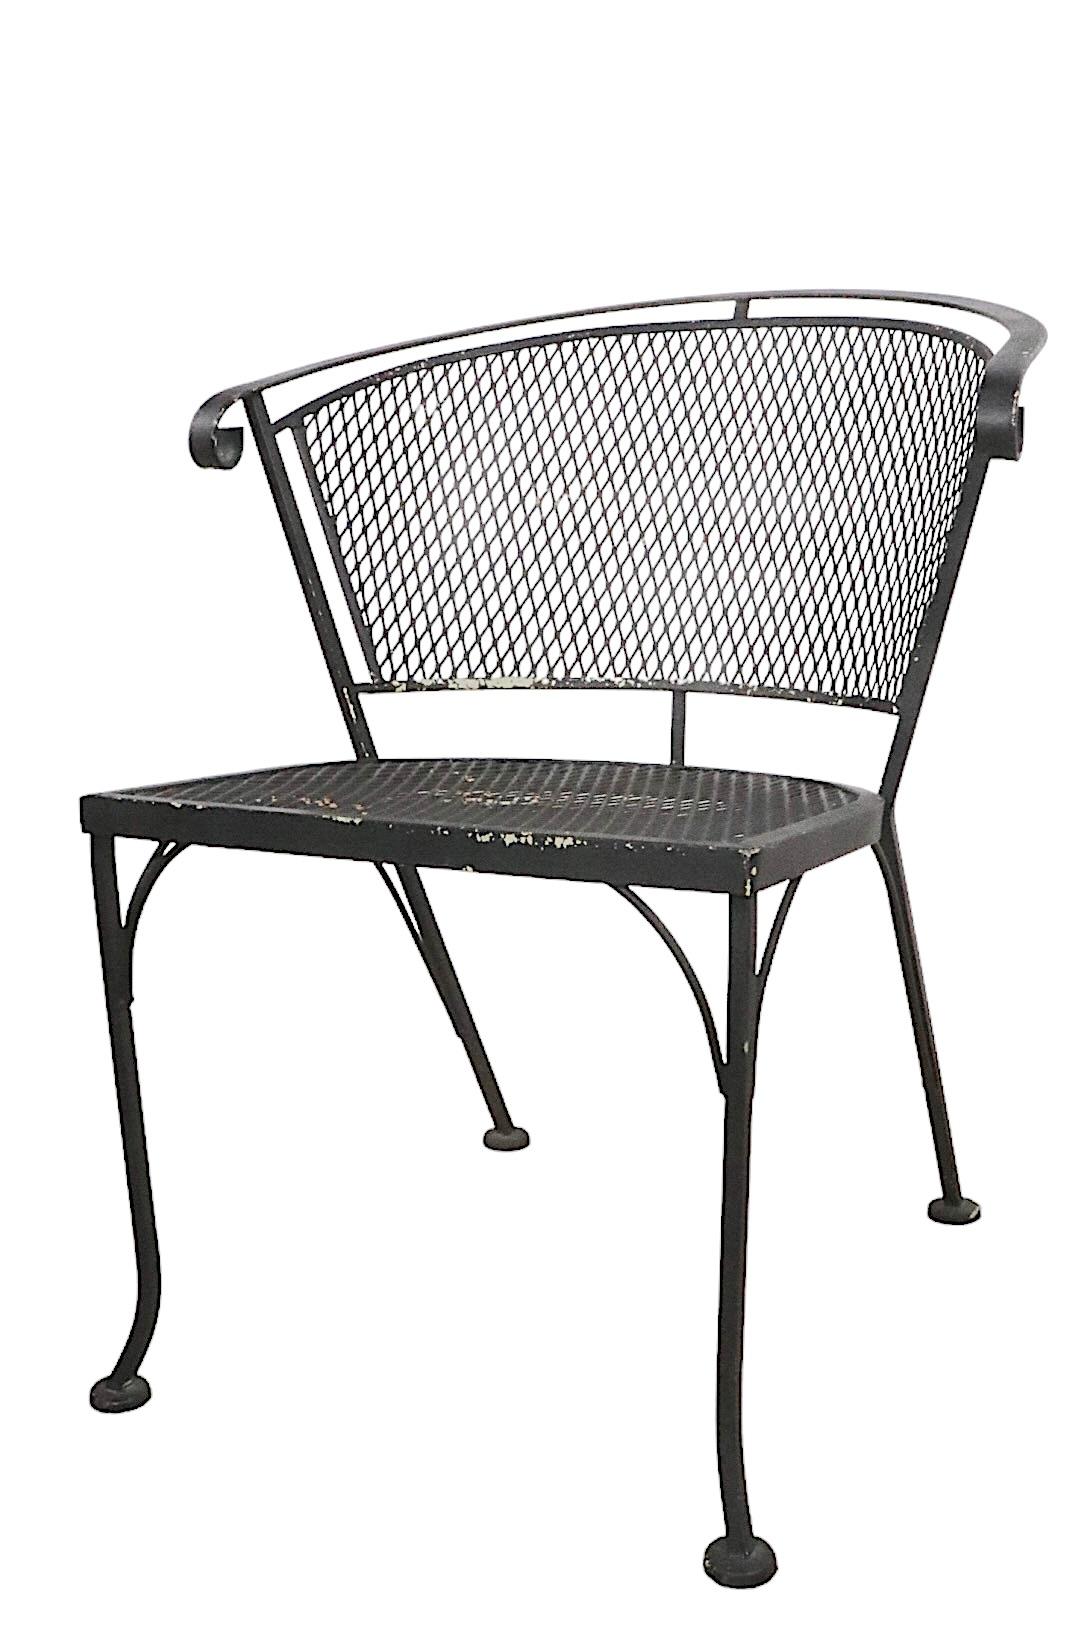 American Pr Vintage  Woodard Garden Patio Poolside Chairs in Wrought Iron and Metal Mesh 